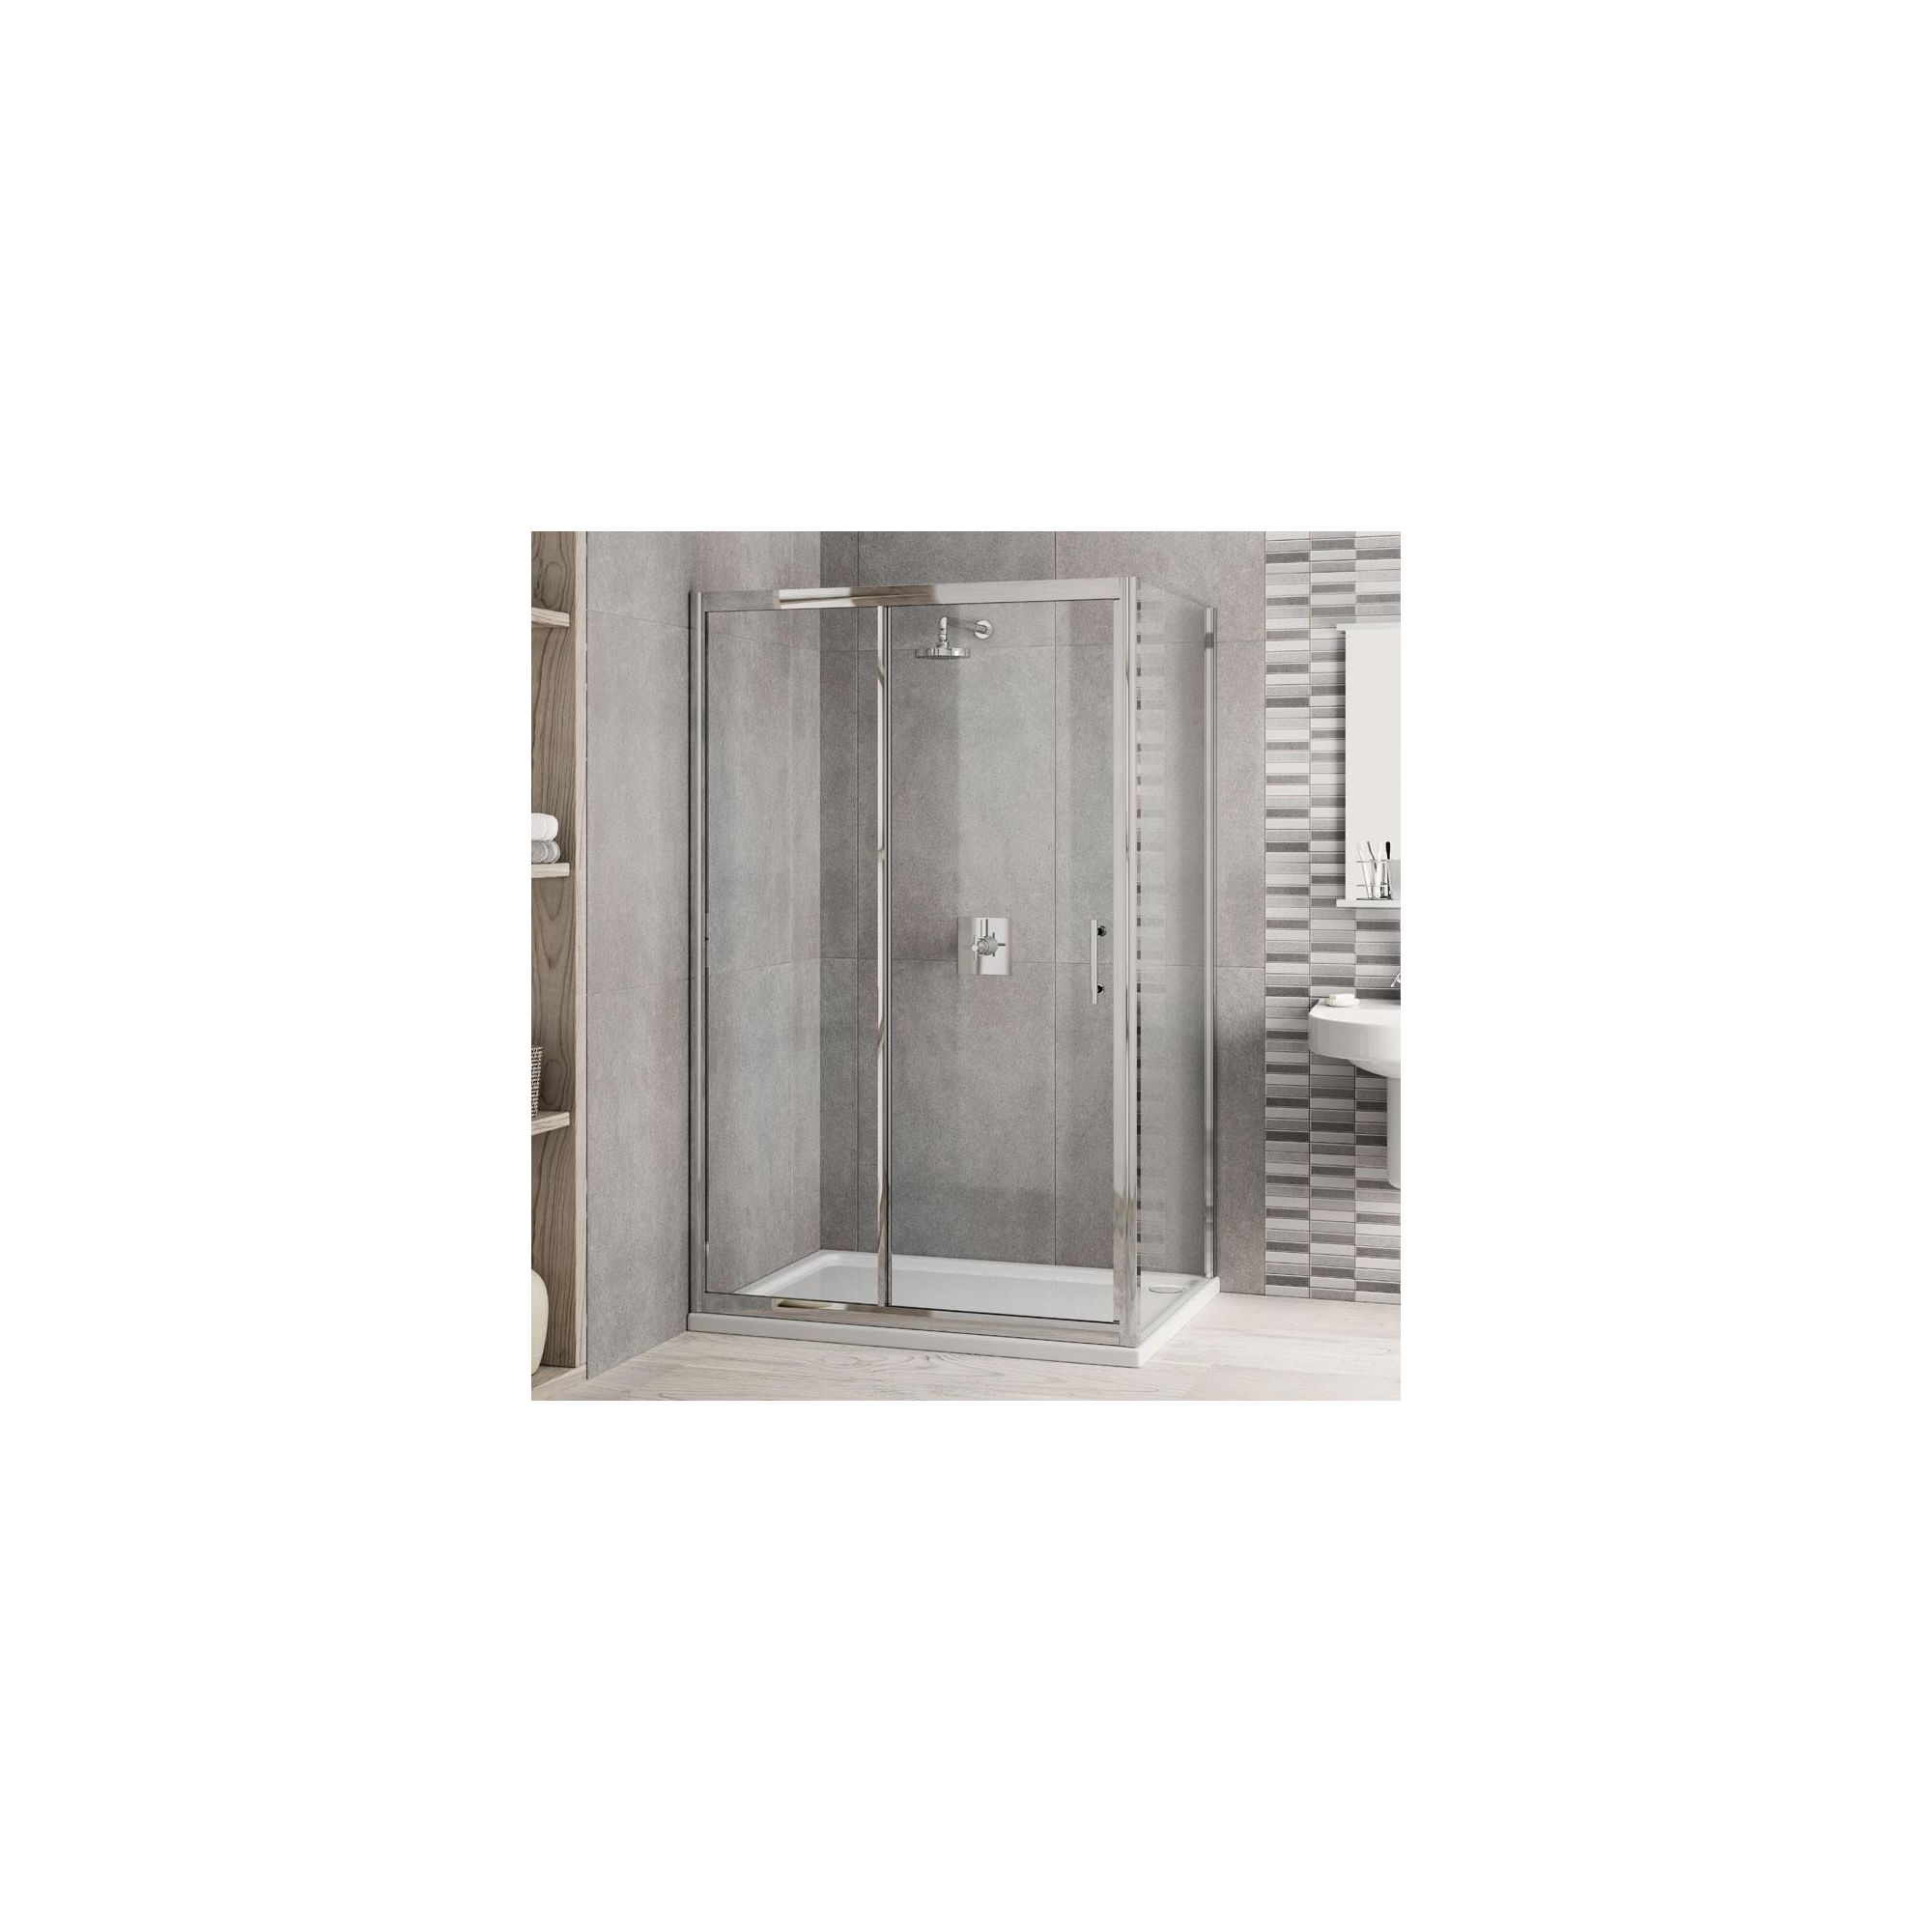 Elemis Inspire Two-Panel Jumbo Sliding Door Shower Enclosure, 1100mm x 900mm, 6mm Glass, Low Profile Tray at Tesco Direct